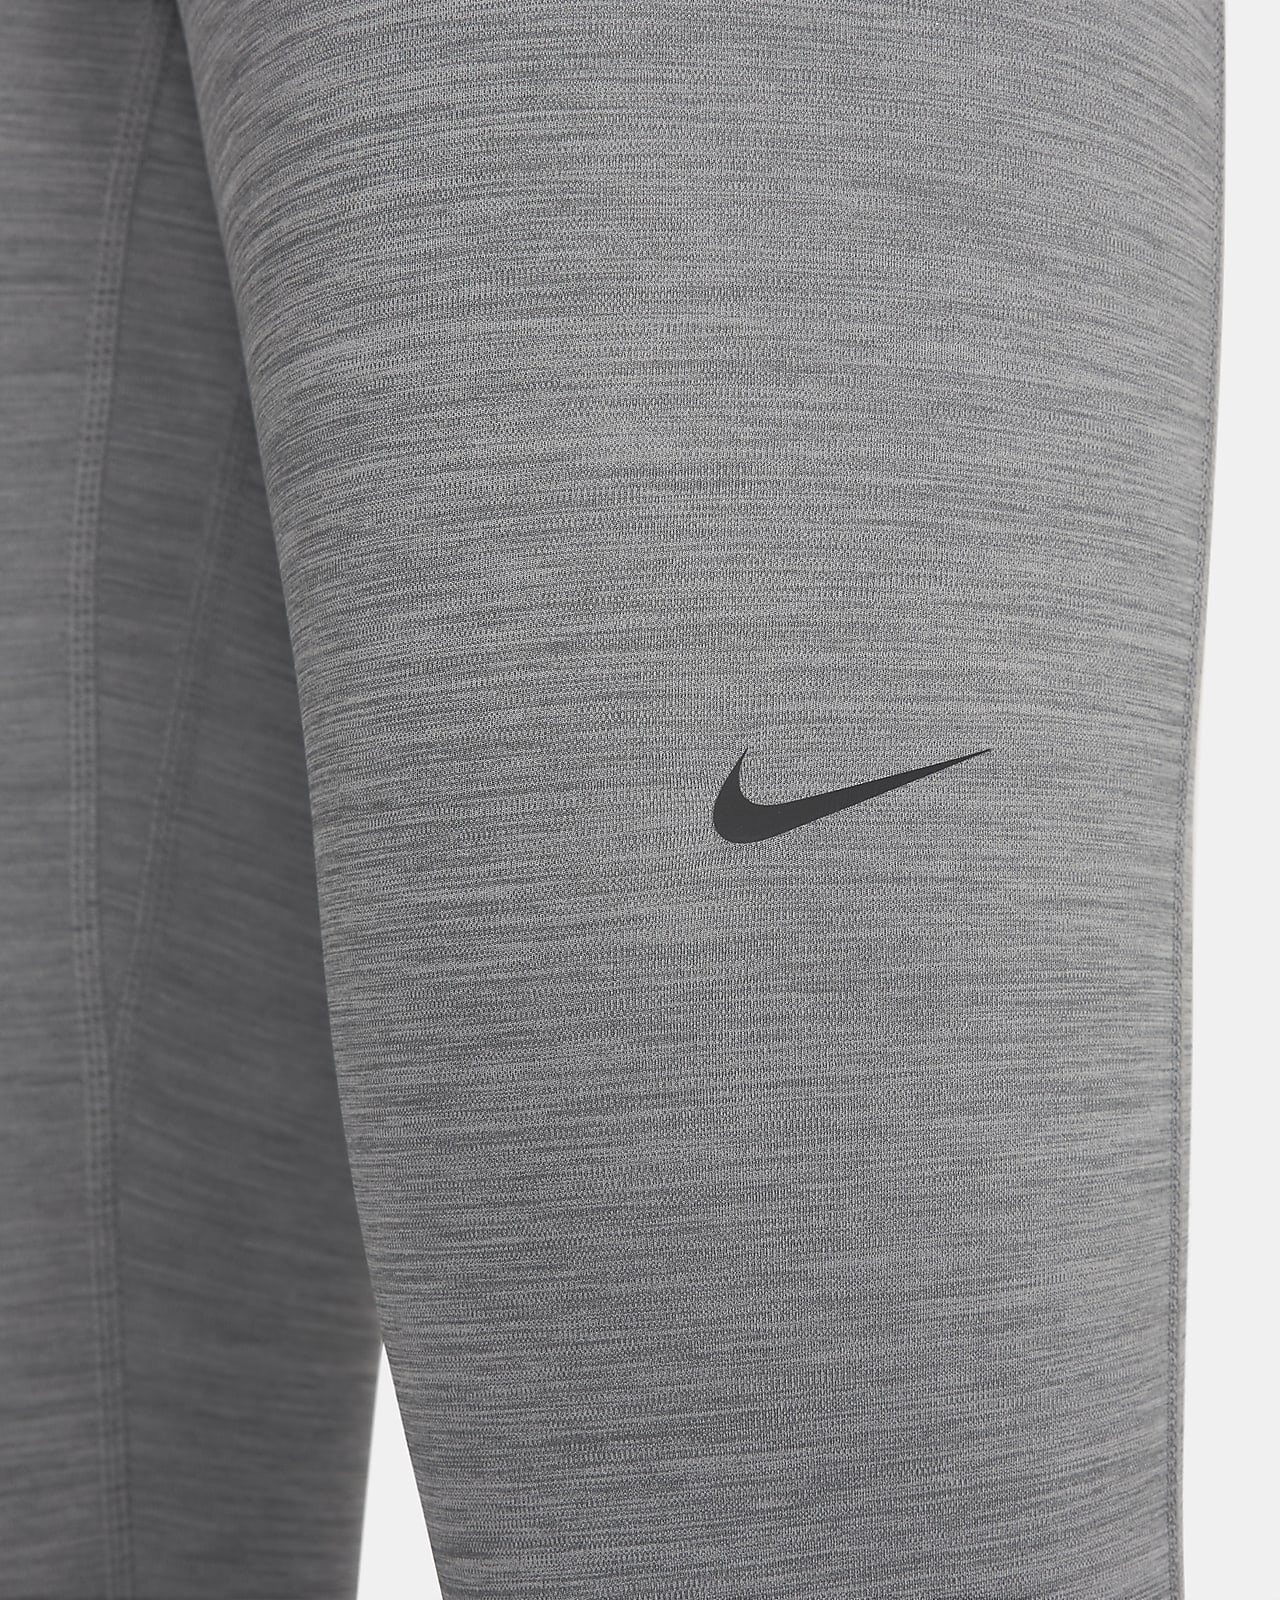 Nike Pro 365 Mid-Rise 7/8 Women's Leggings with Pockets FB50